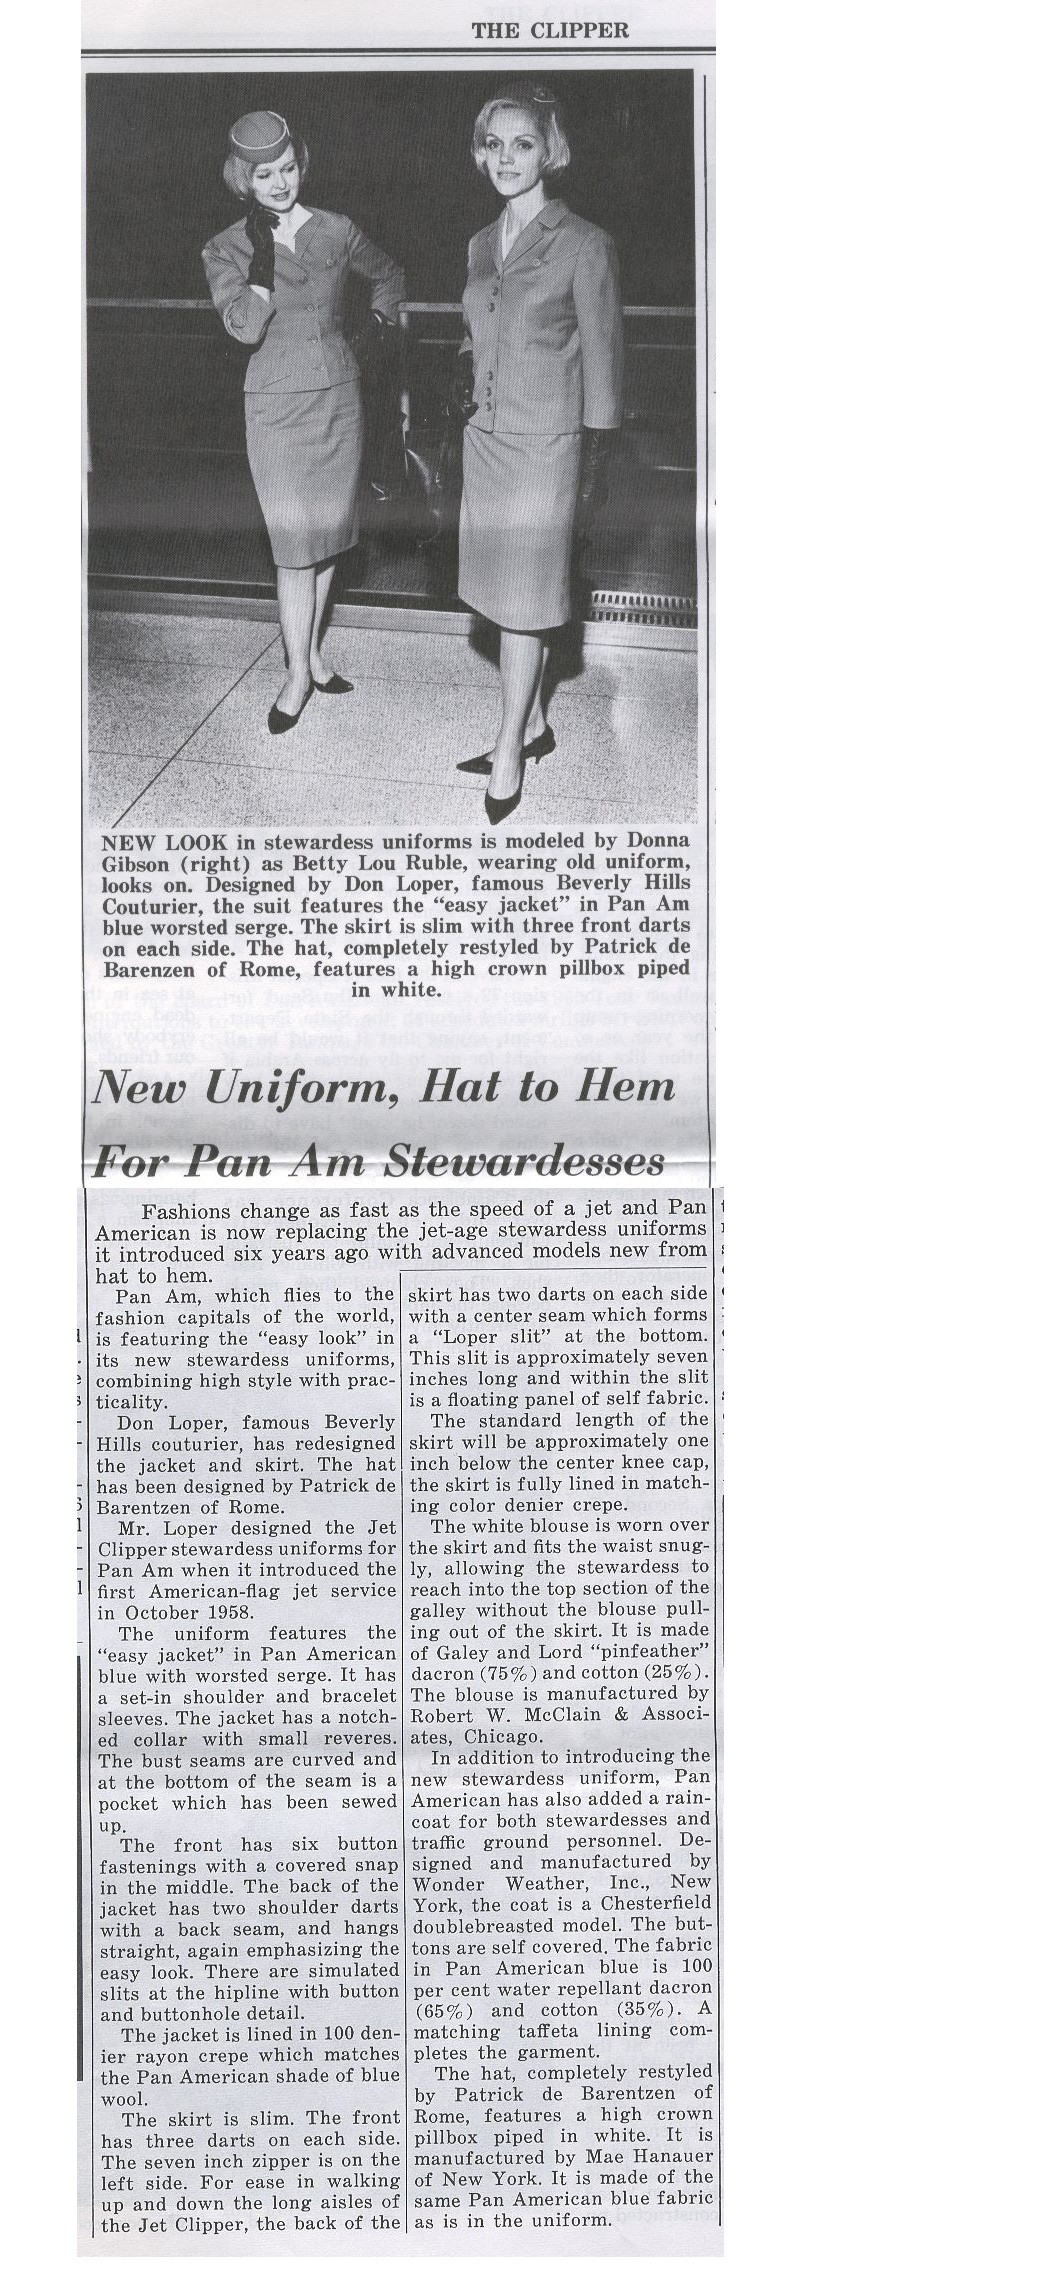 1965, March,  Article on new Flight Attendant uniforms.